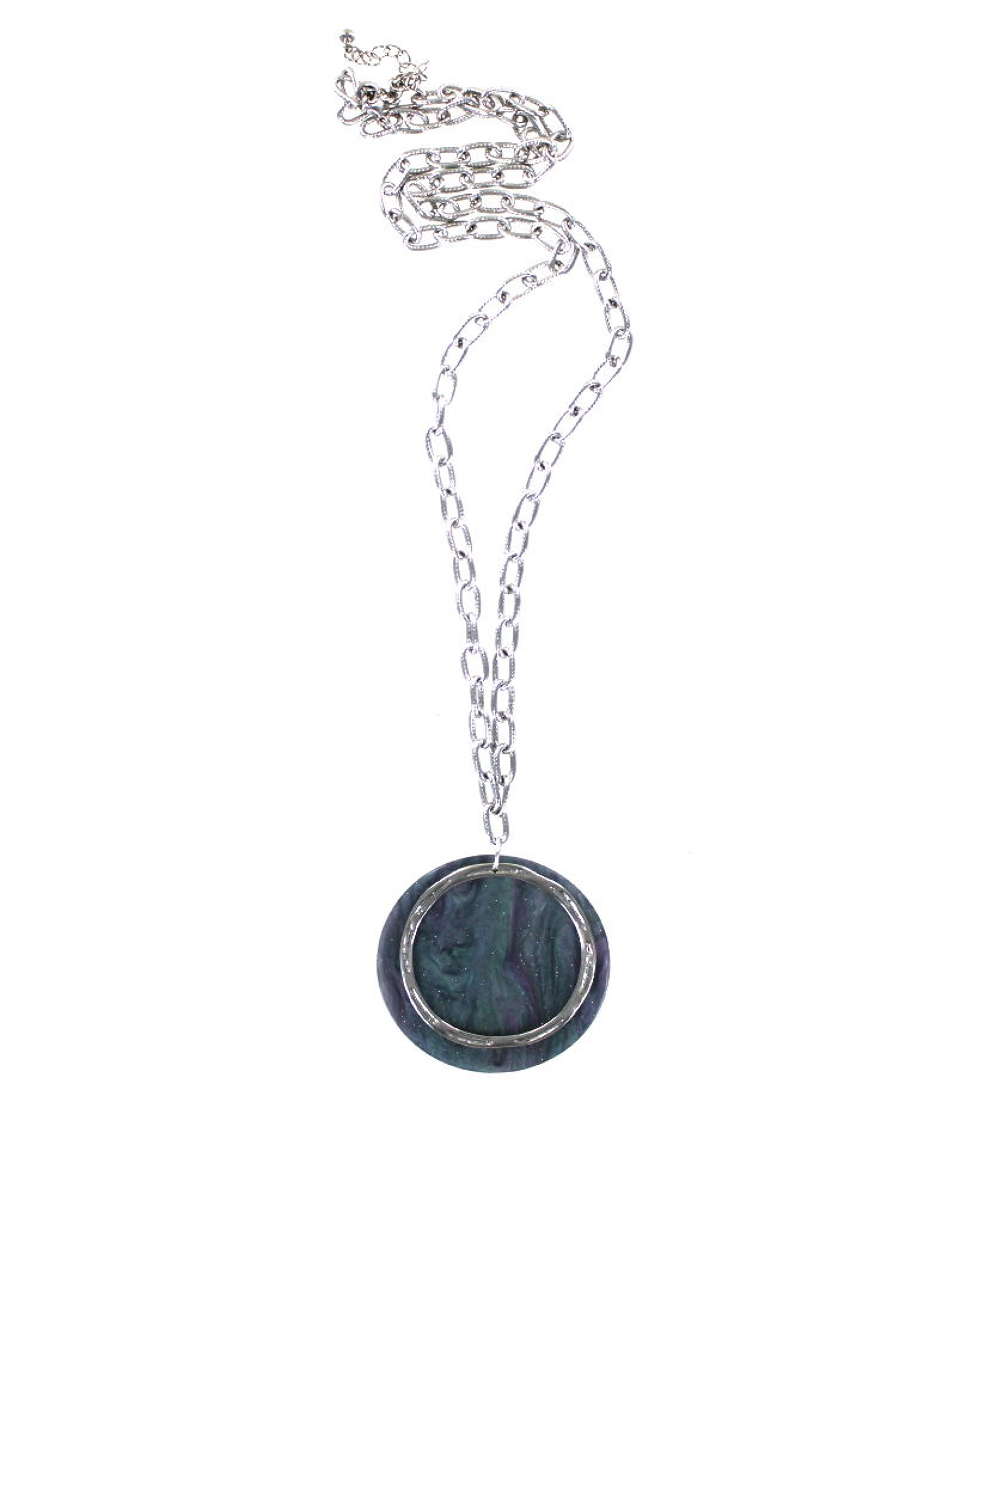 Necklace with Galaxy effect pendant detail.